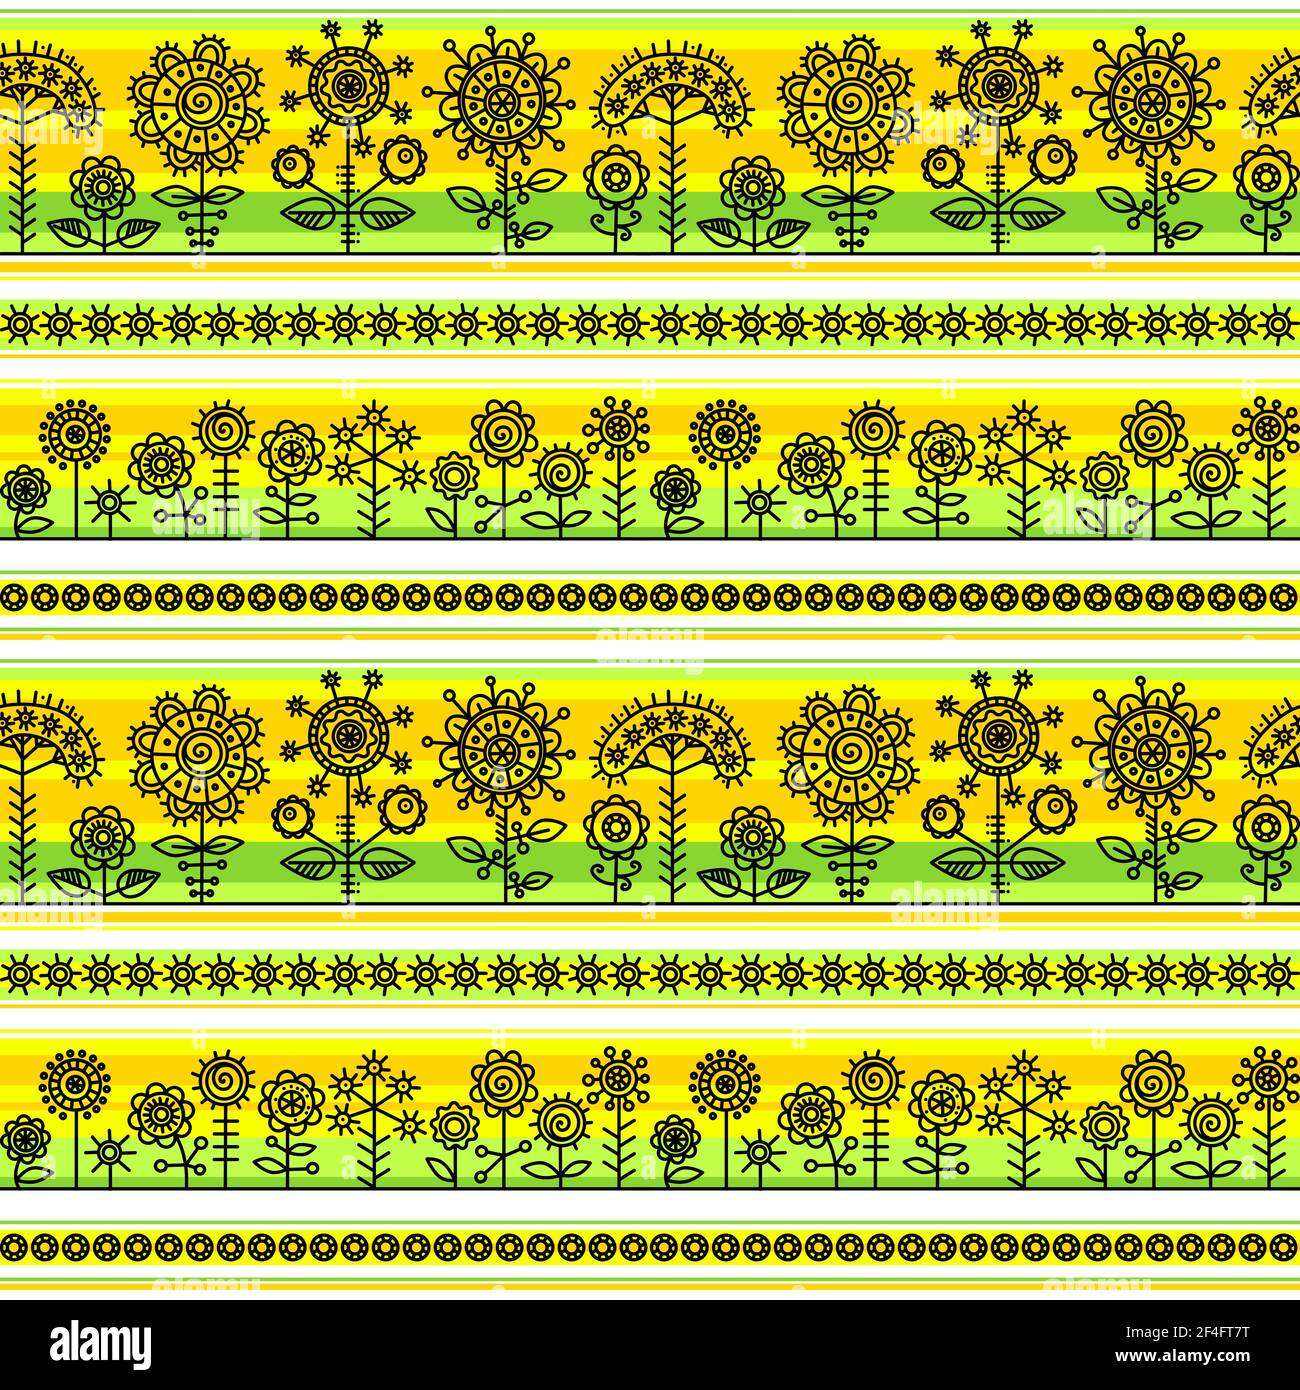 Seamless pattern with decorative flowers in spring colors. Decorative stylized flowers create openwork lace on yellow, green and orange stripes. Stock Vector